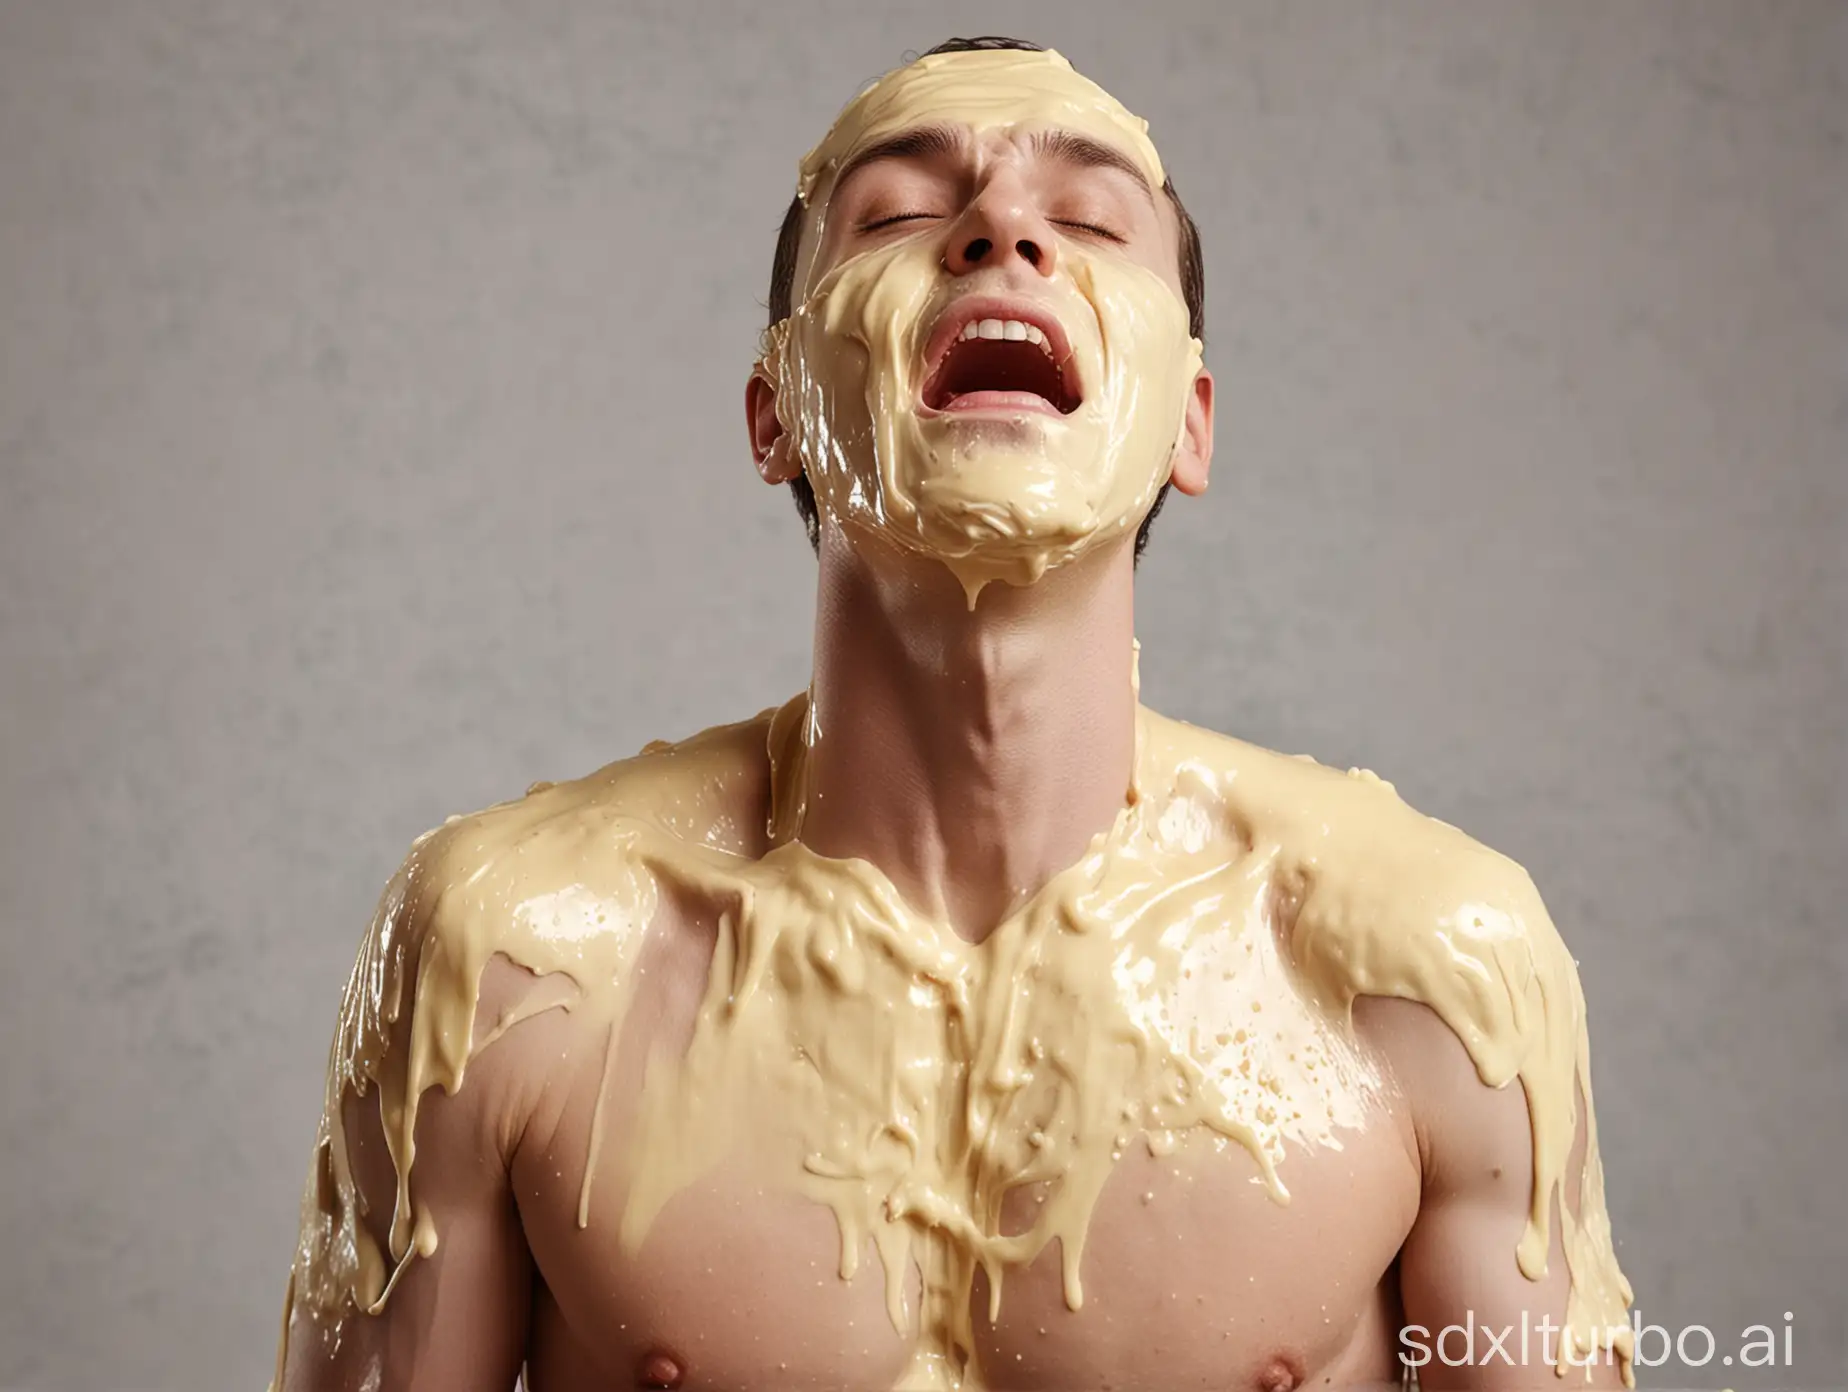 ButterCovered-Man-Shaking-with-Intensity